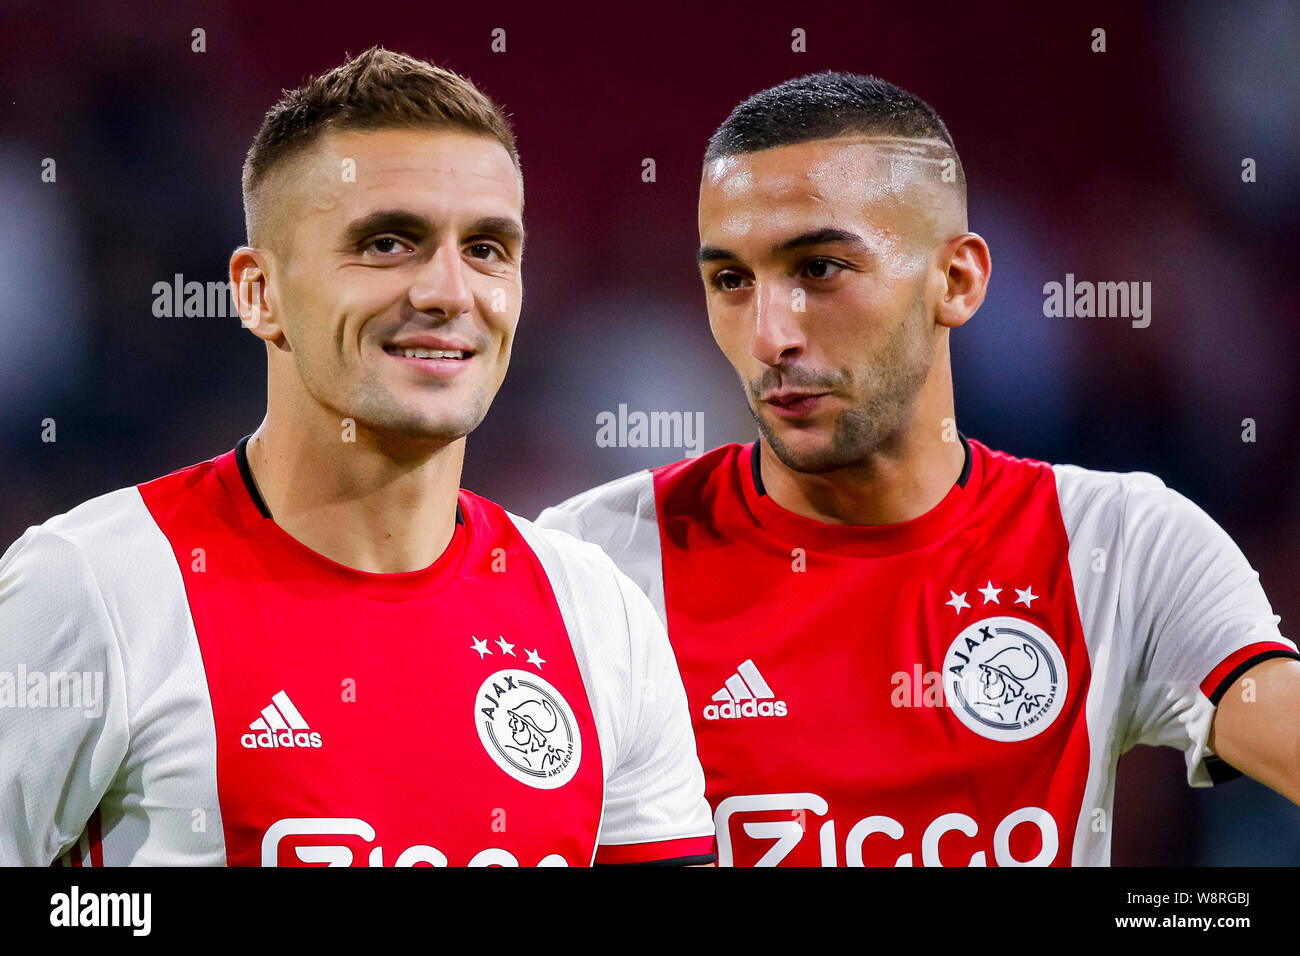 Image result for hakim ziyech 2020